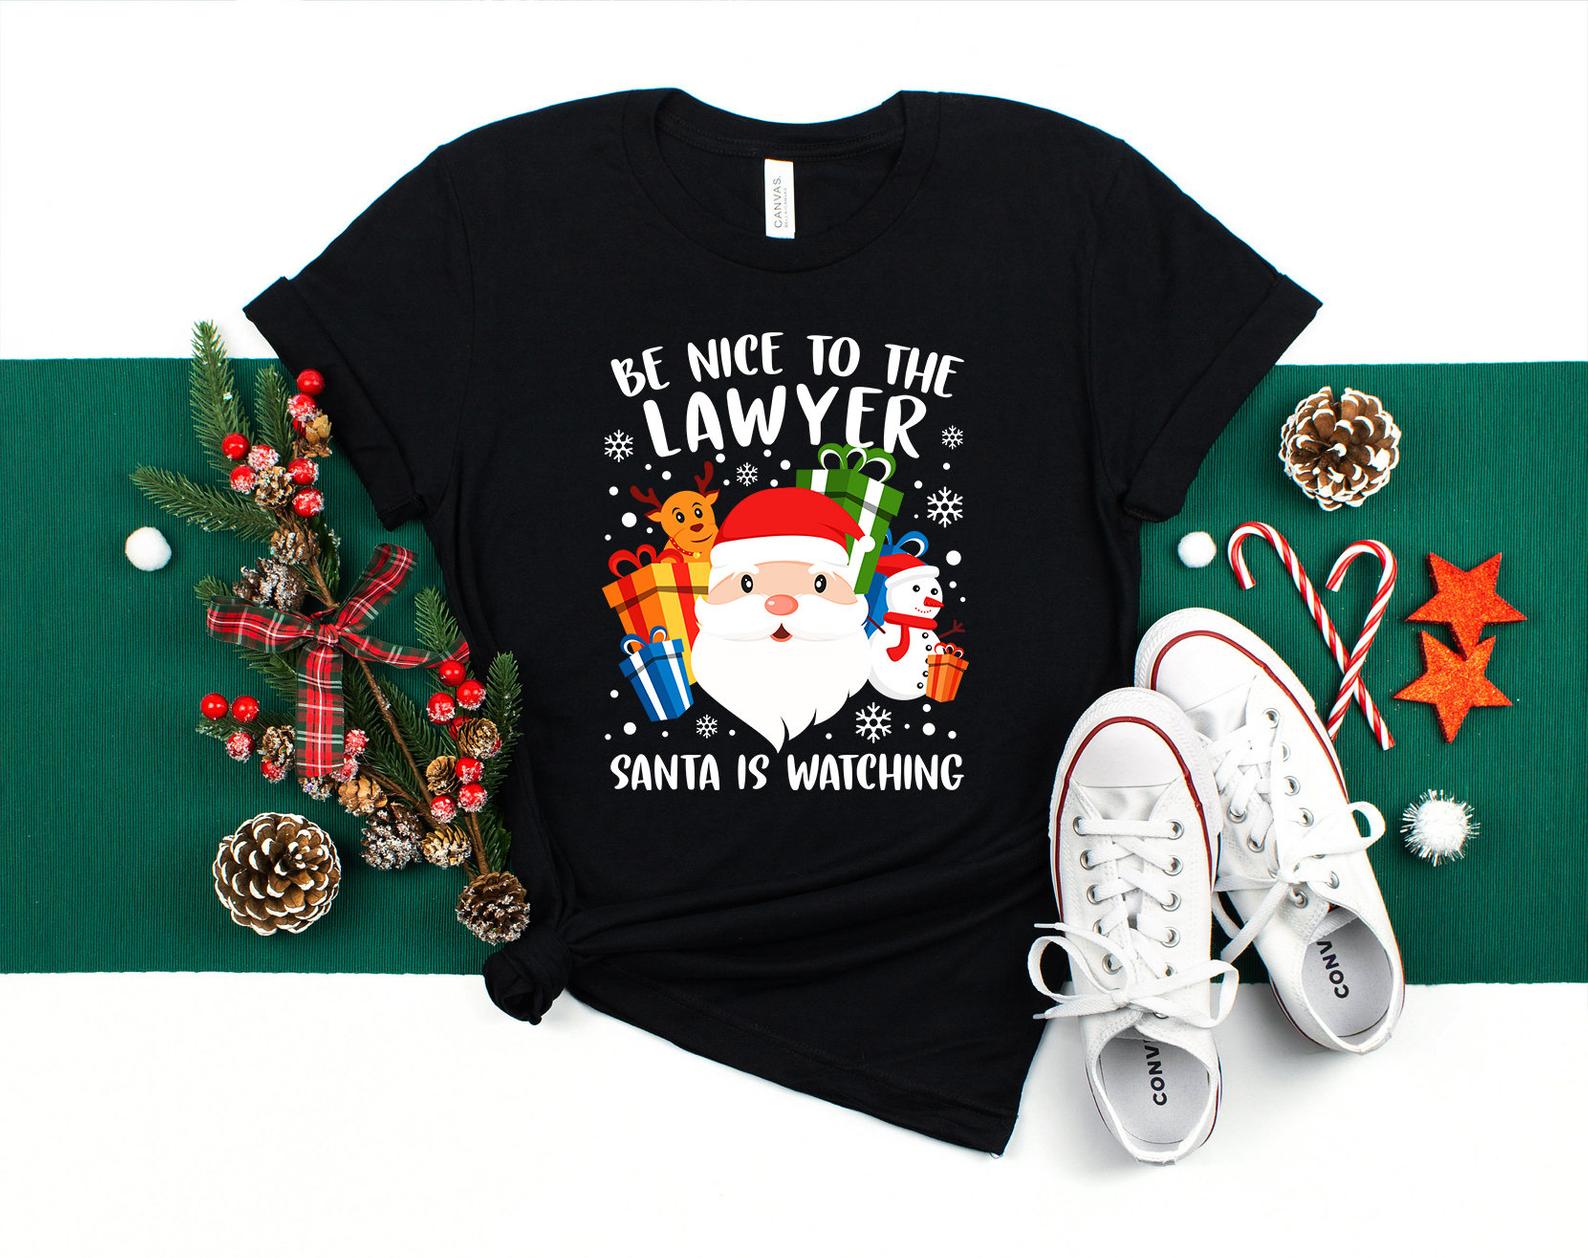 Lawyer Christmas Shirt Be Nice To The Lawyer Santa Is Watching Shirt Funny Lawyer T Shirt Black Unisex S-6XL